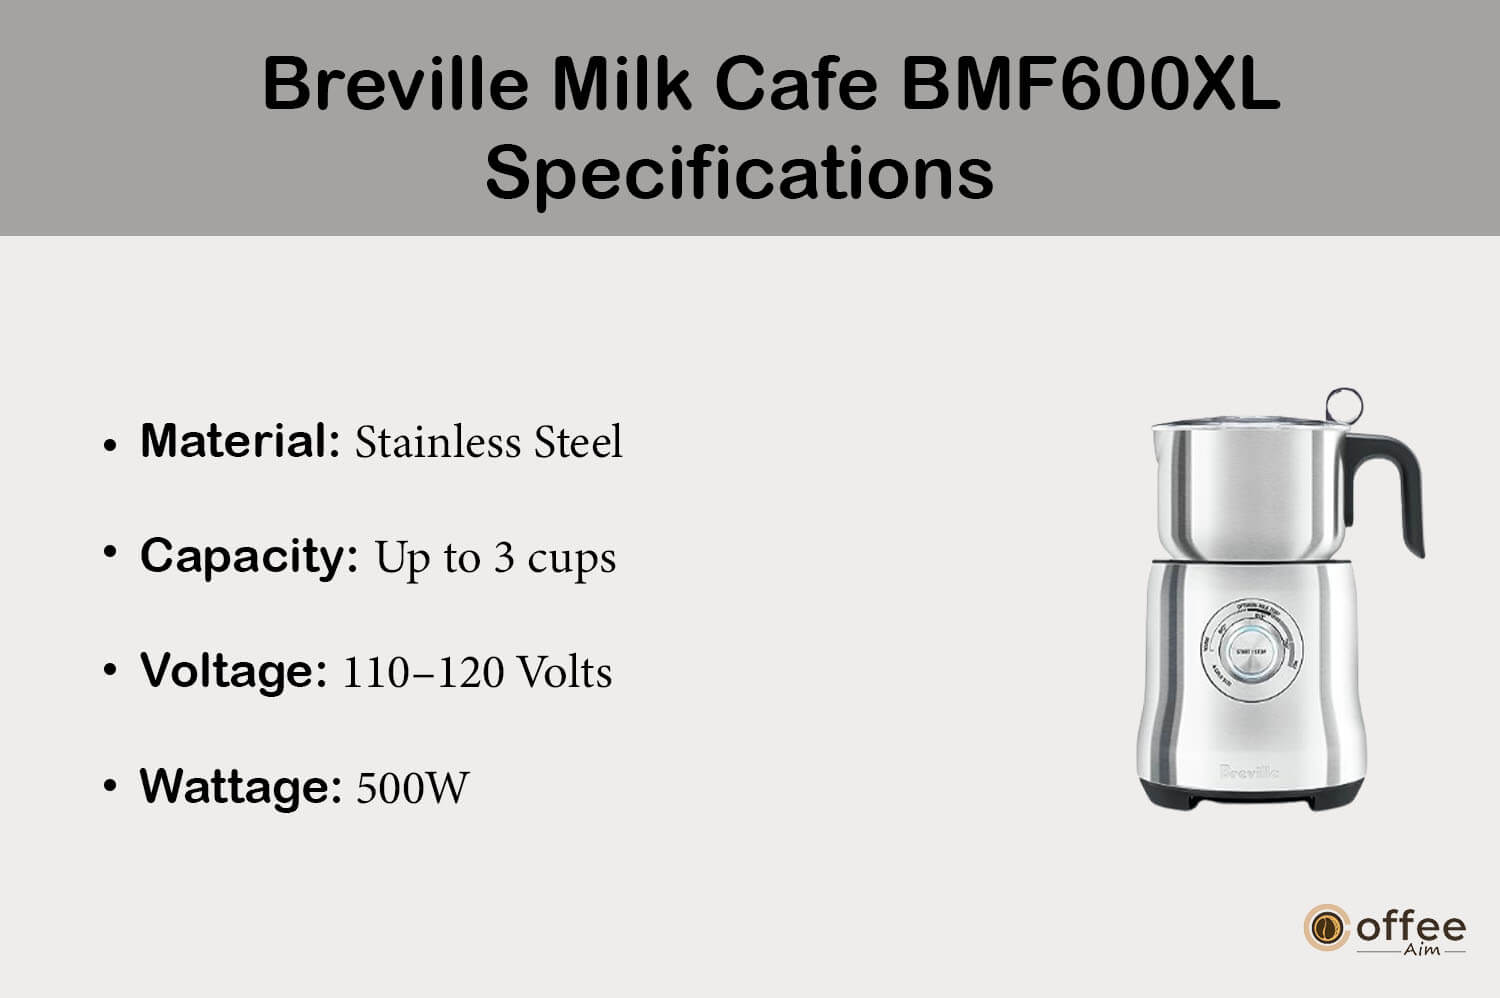 This illustration presents the specifications of the "Breville Milk Cafe BMF600XL" as detailed in the article "Breville Milk Cafe BMF600XL Review."